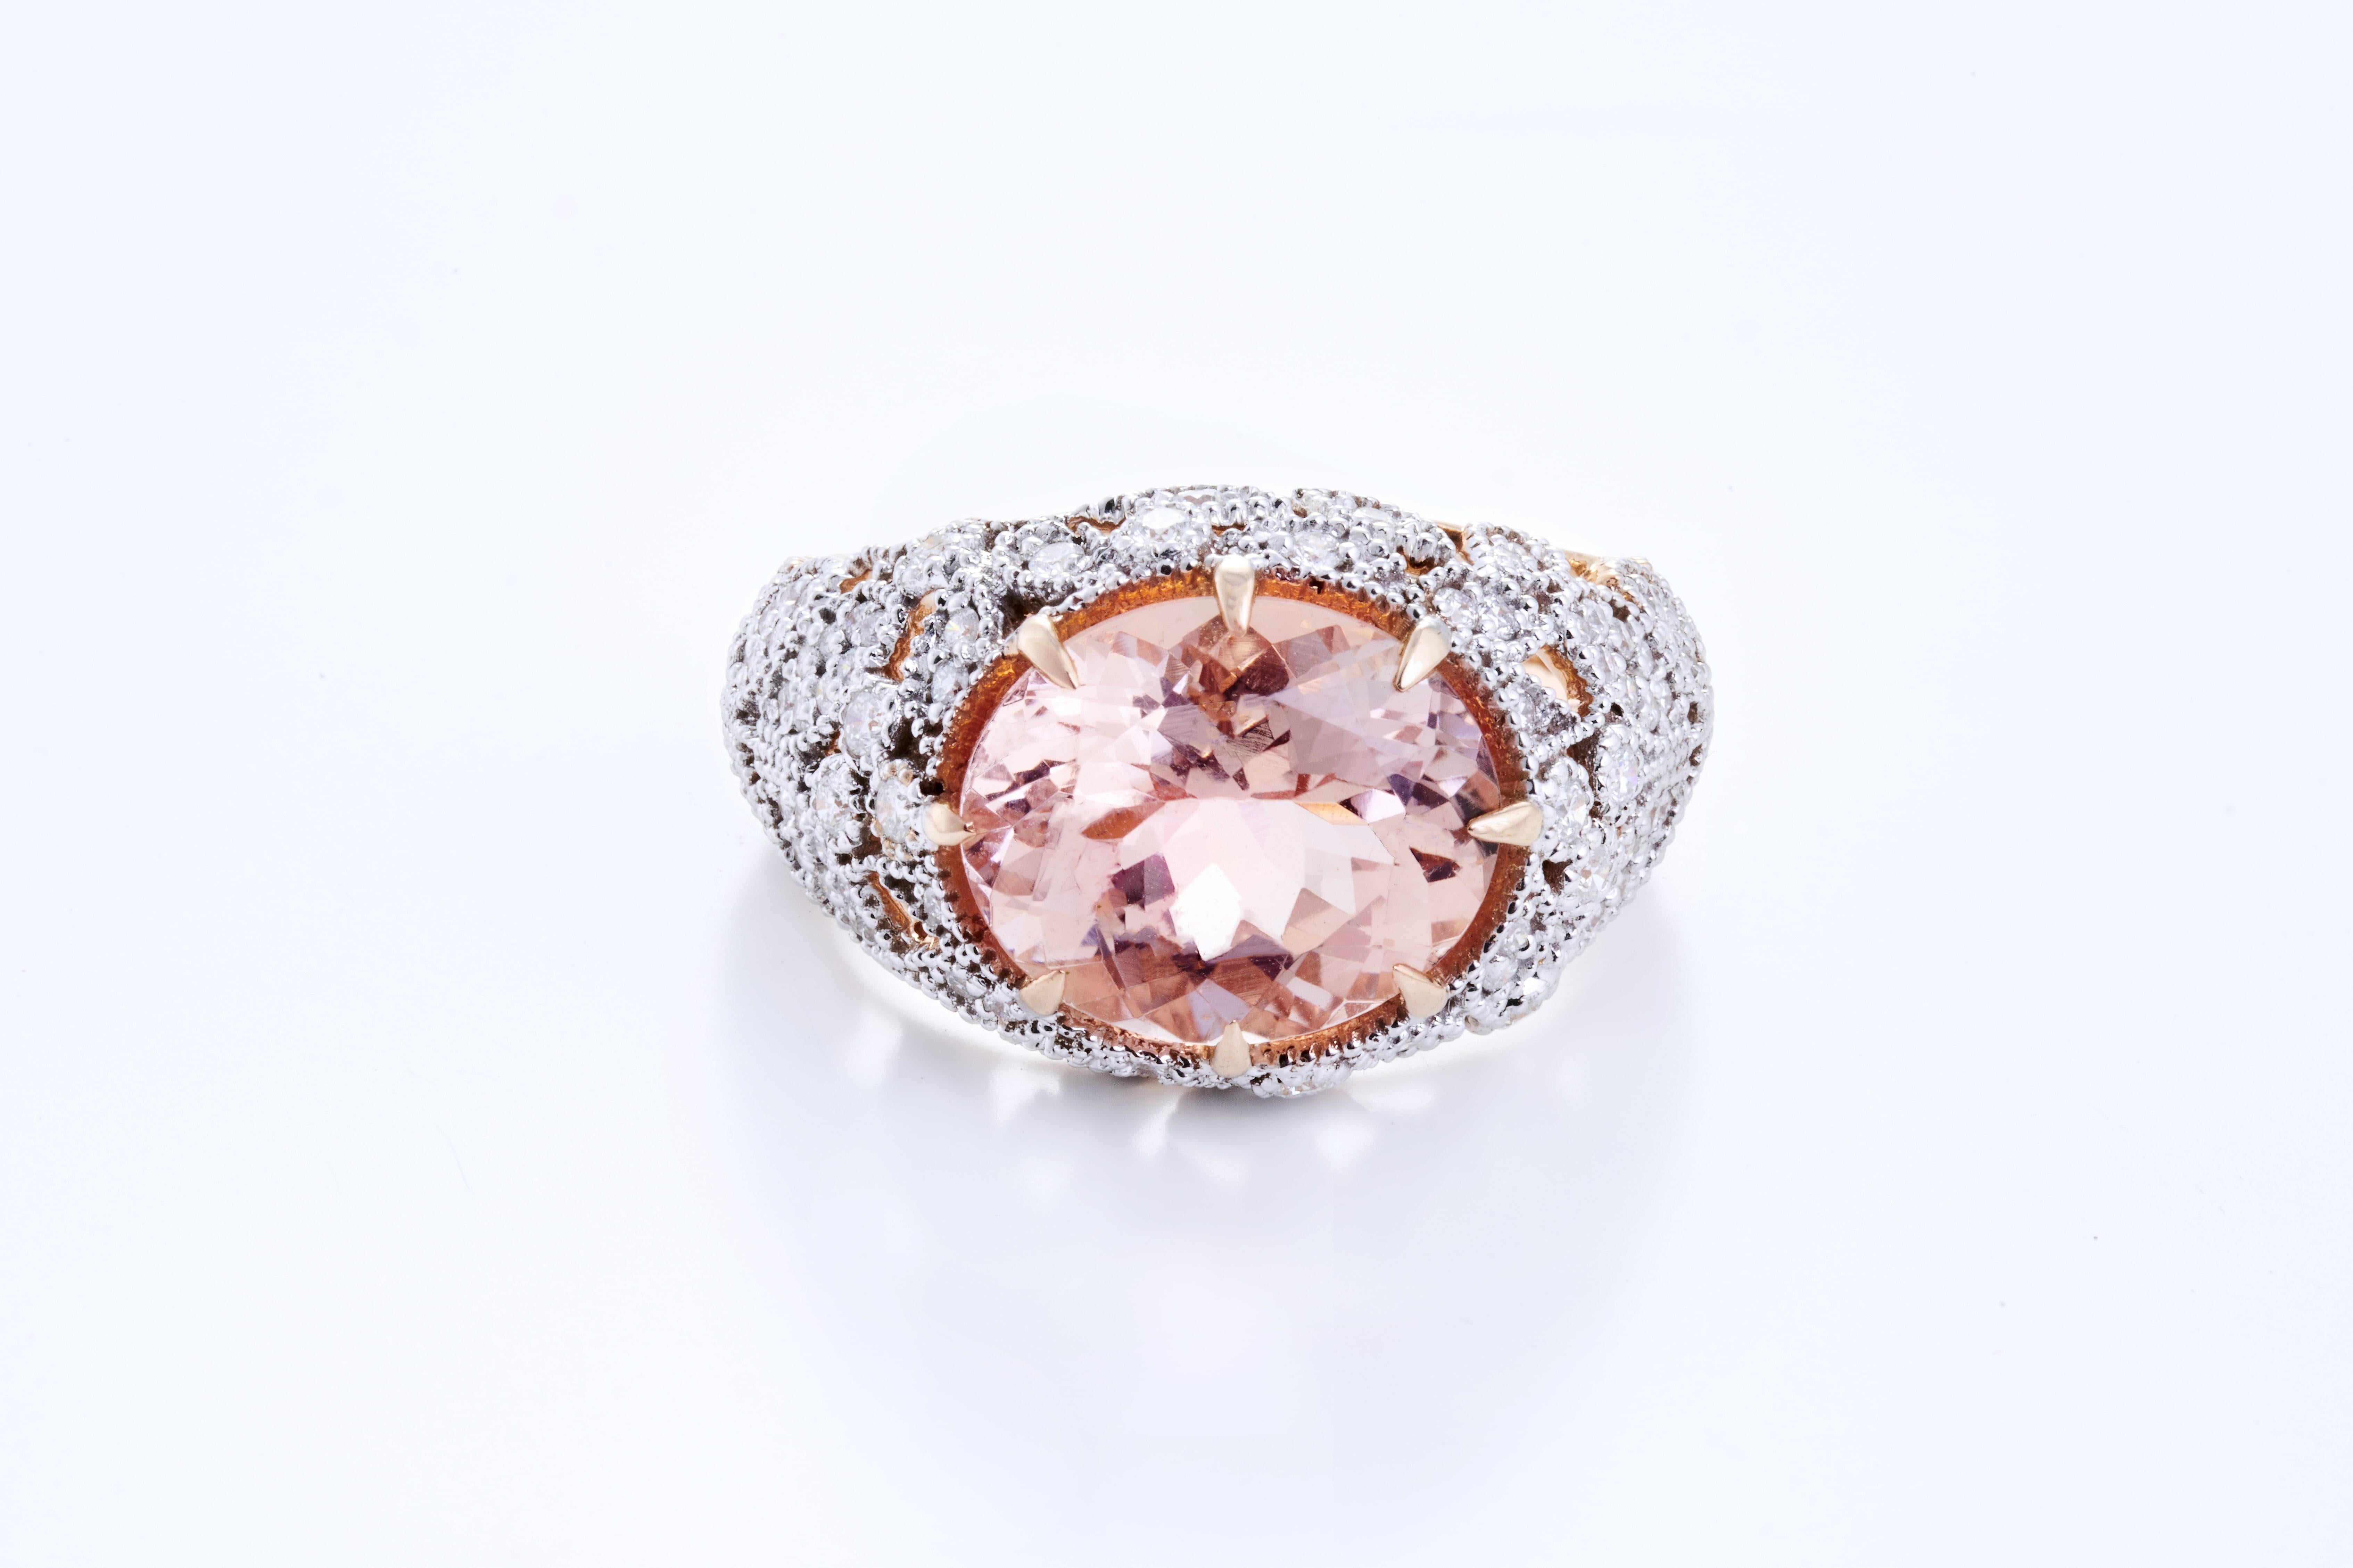 This Ring is set in 7.26 grams of 18K Rose Gold with 100 round cut diamonds around the Gemstone VS/G quality and colour weighing 0.65 carats. 

These diamonds and gemstones have been carefully picked and selected from authentic sources and complete